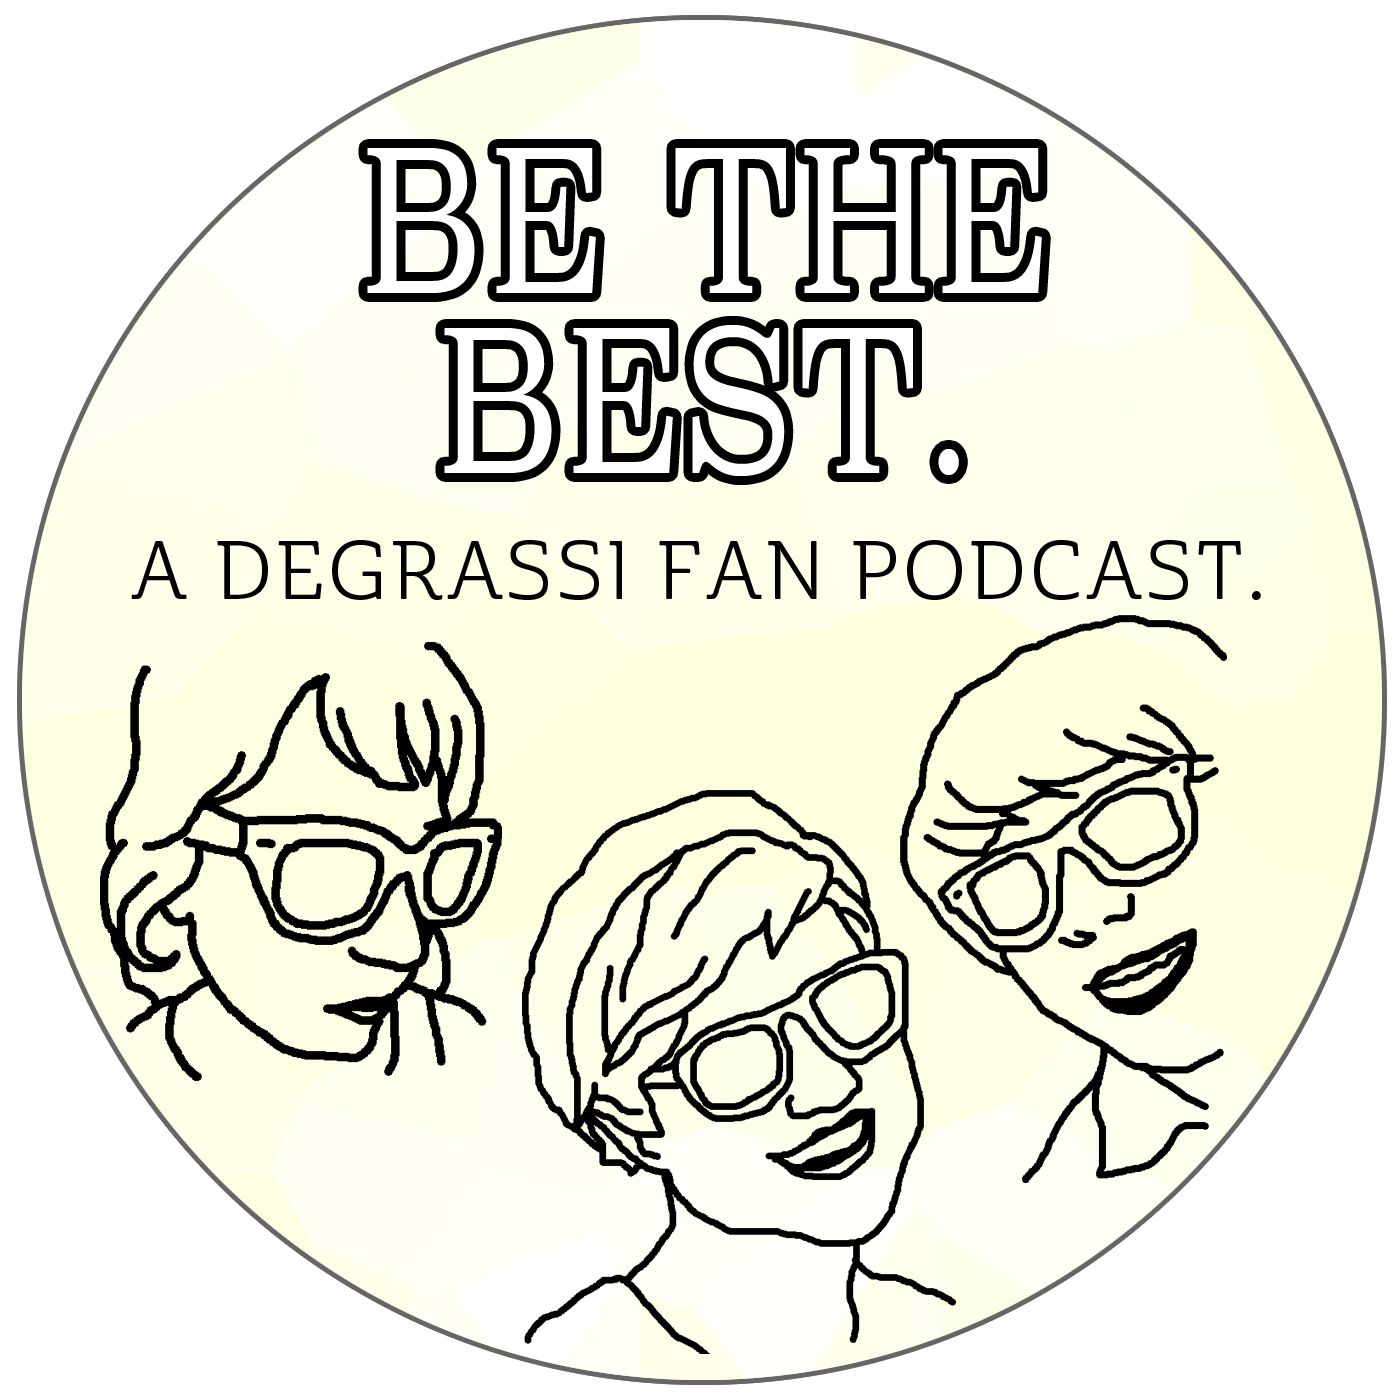 Be The Best: A Degrassi Fan Podcast